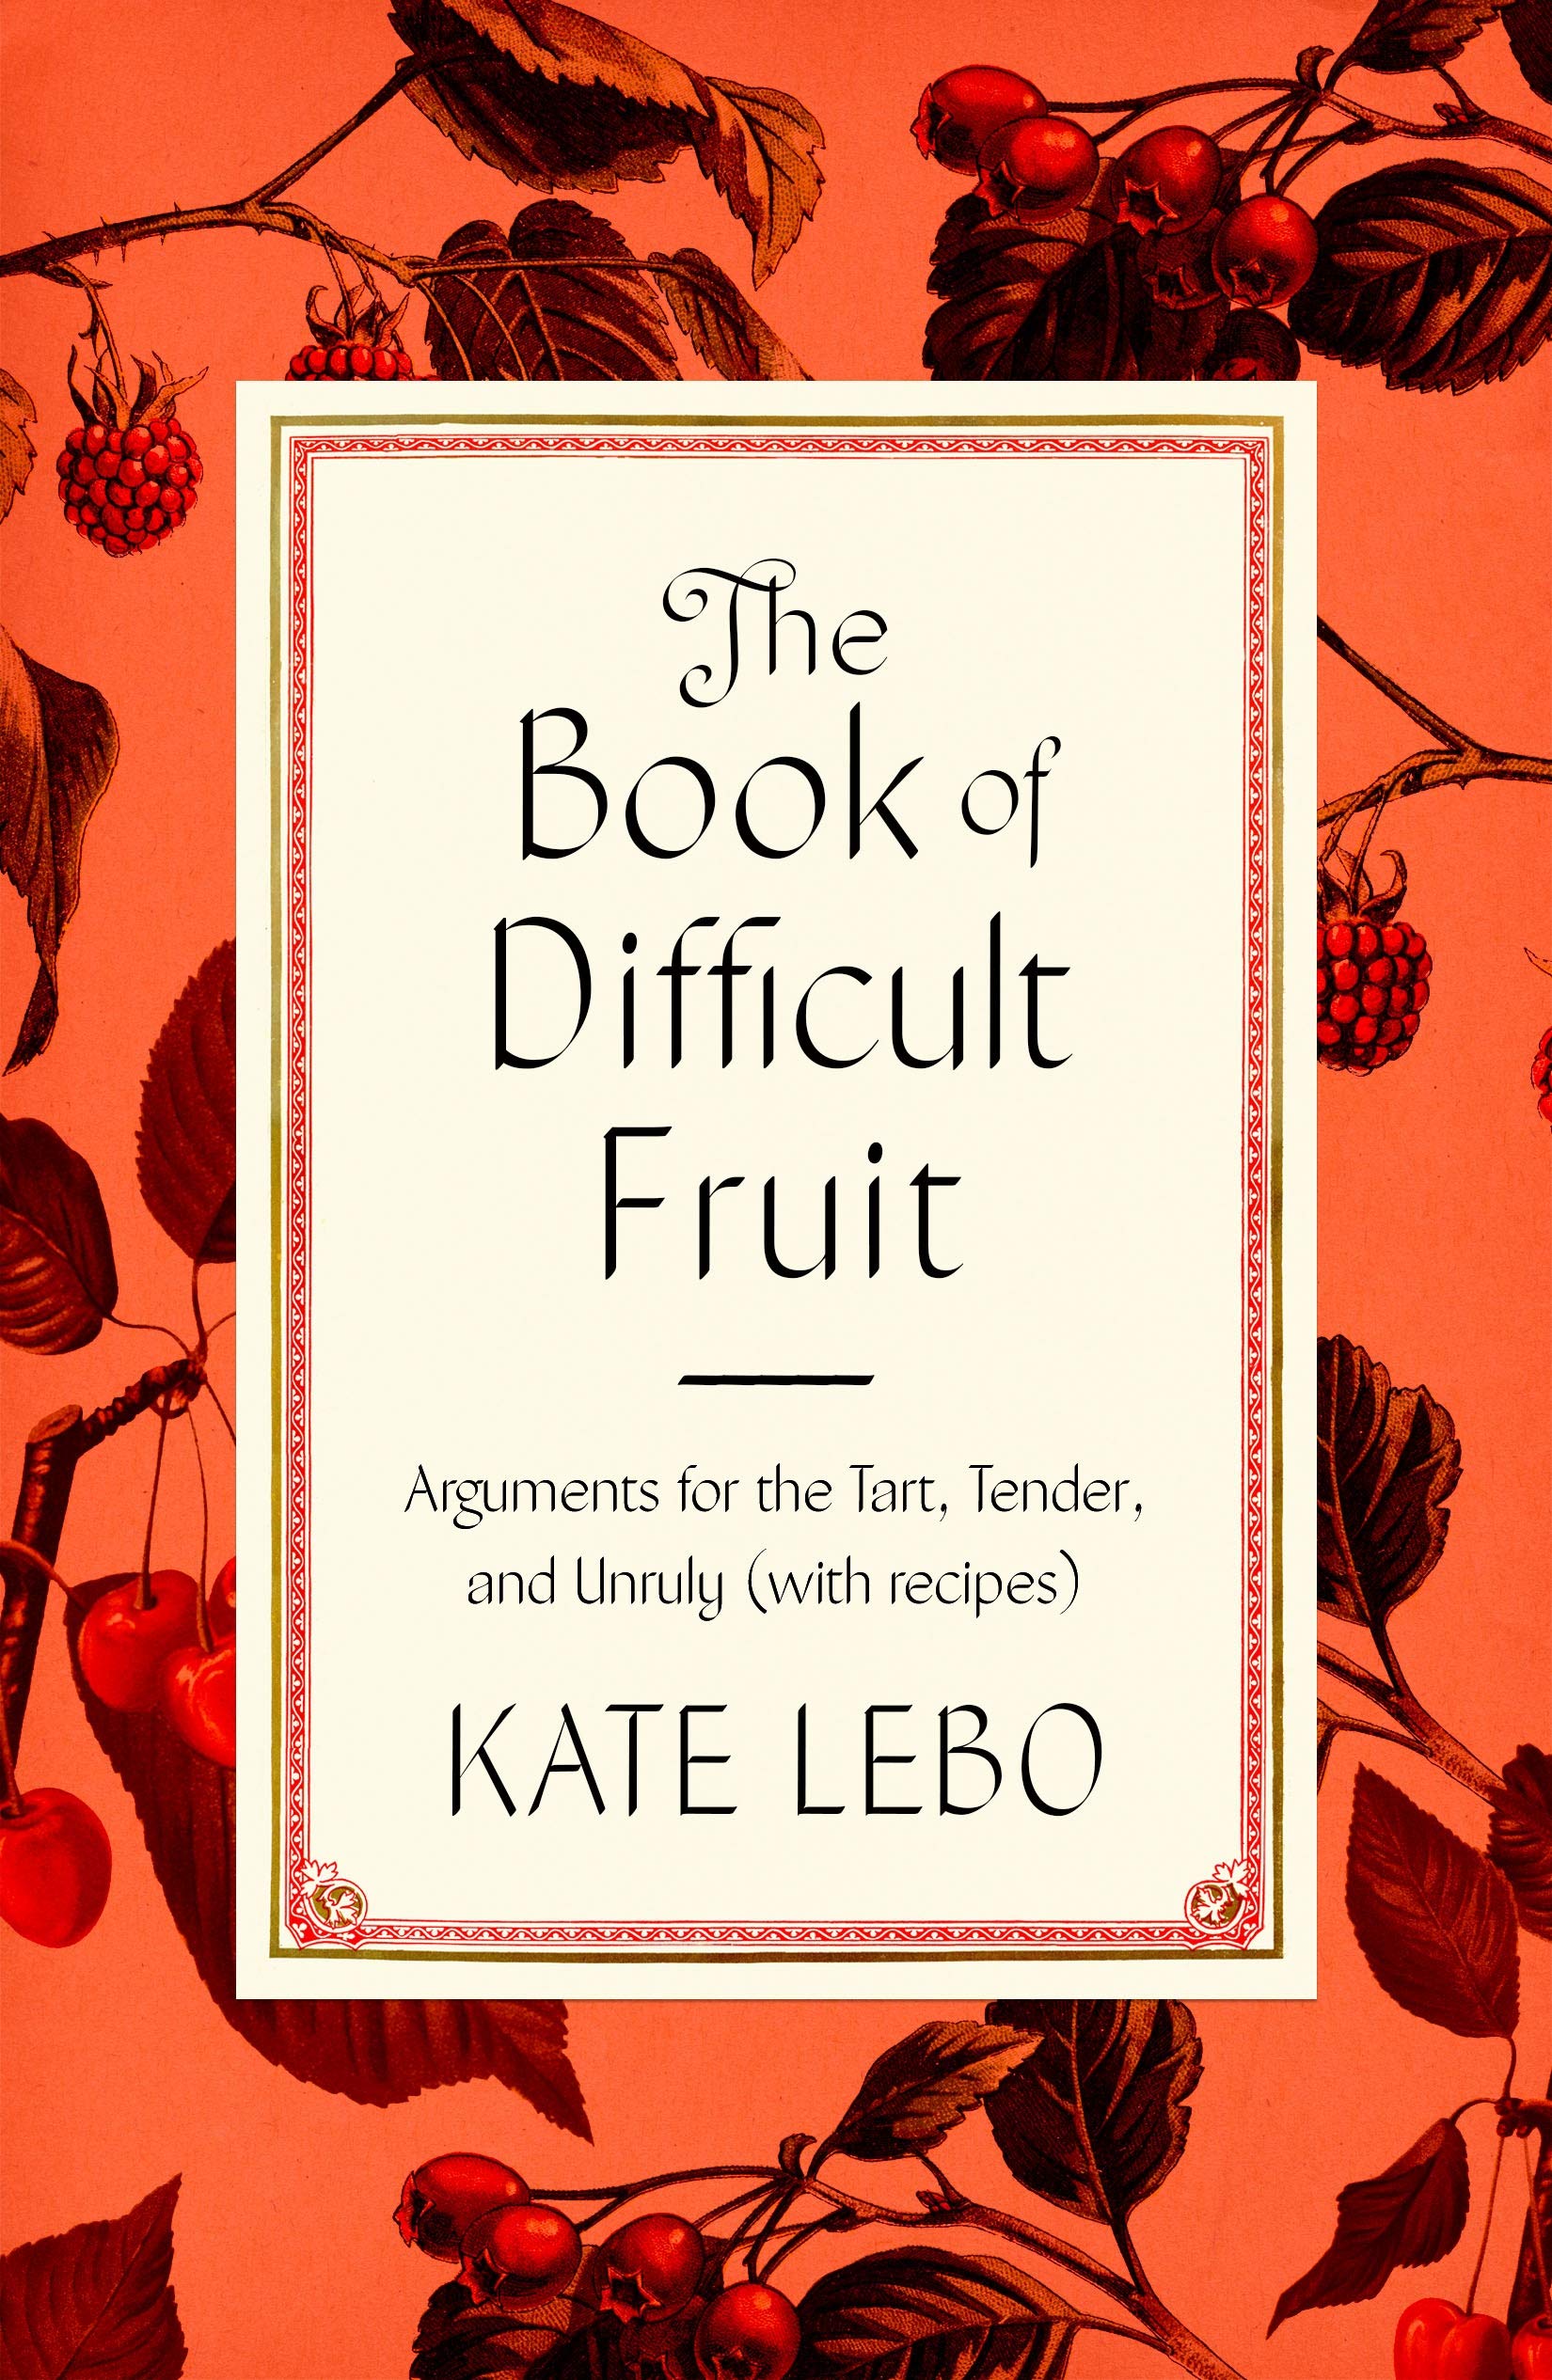 The Book of Difficult Fruit: Arguments for the Tart, Tender, and Unruly, paperback edition (Kate Lebo)